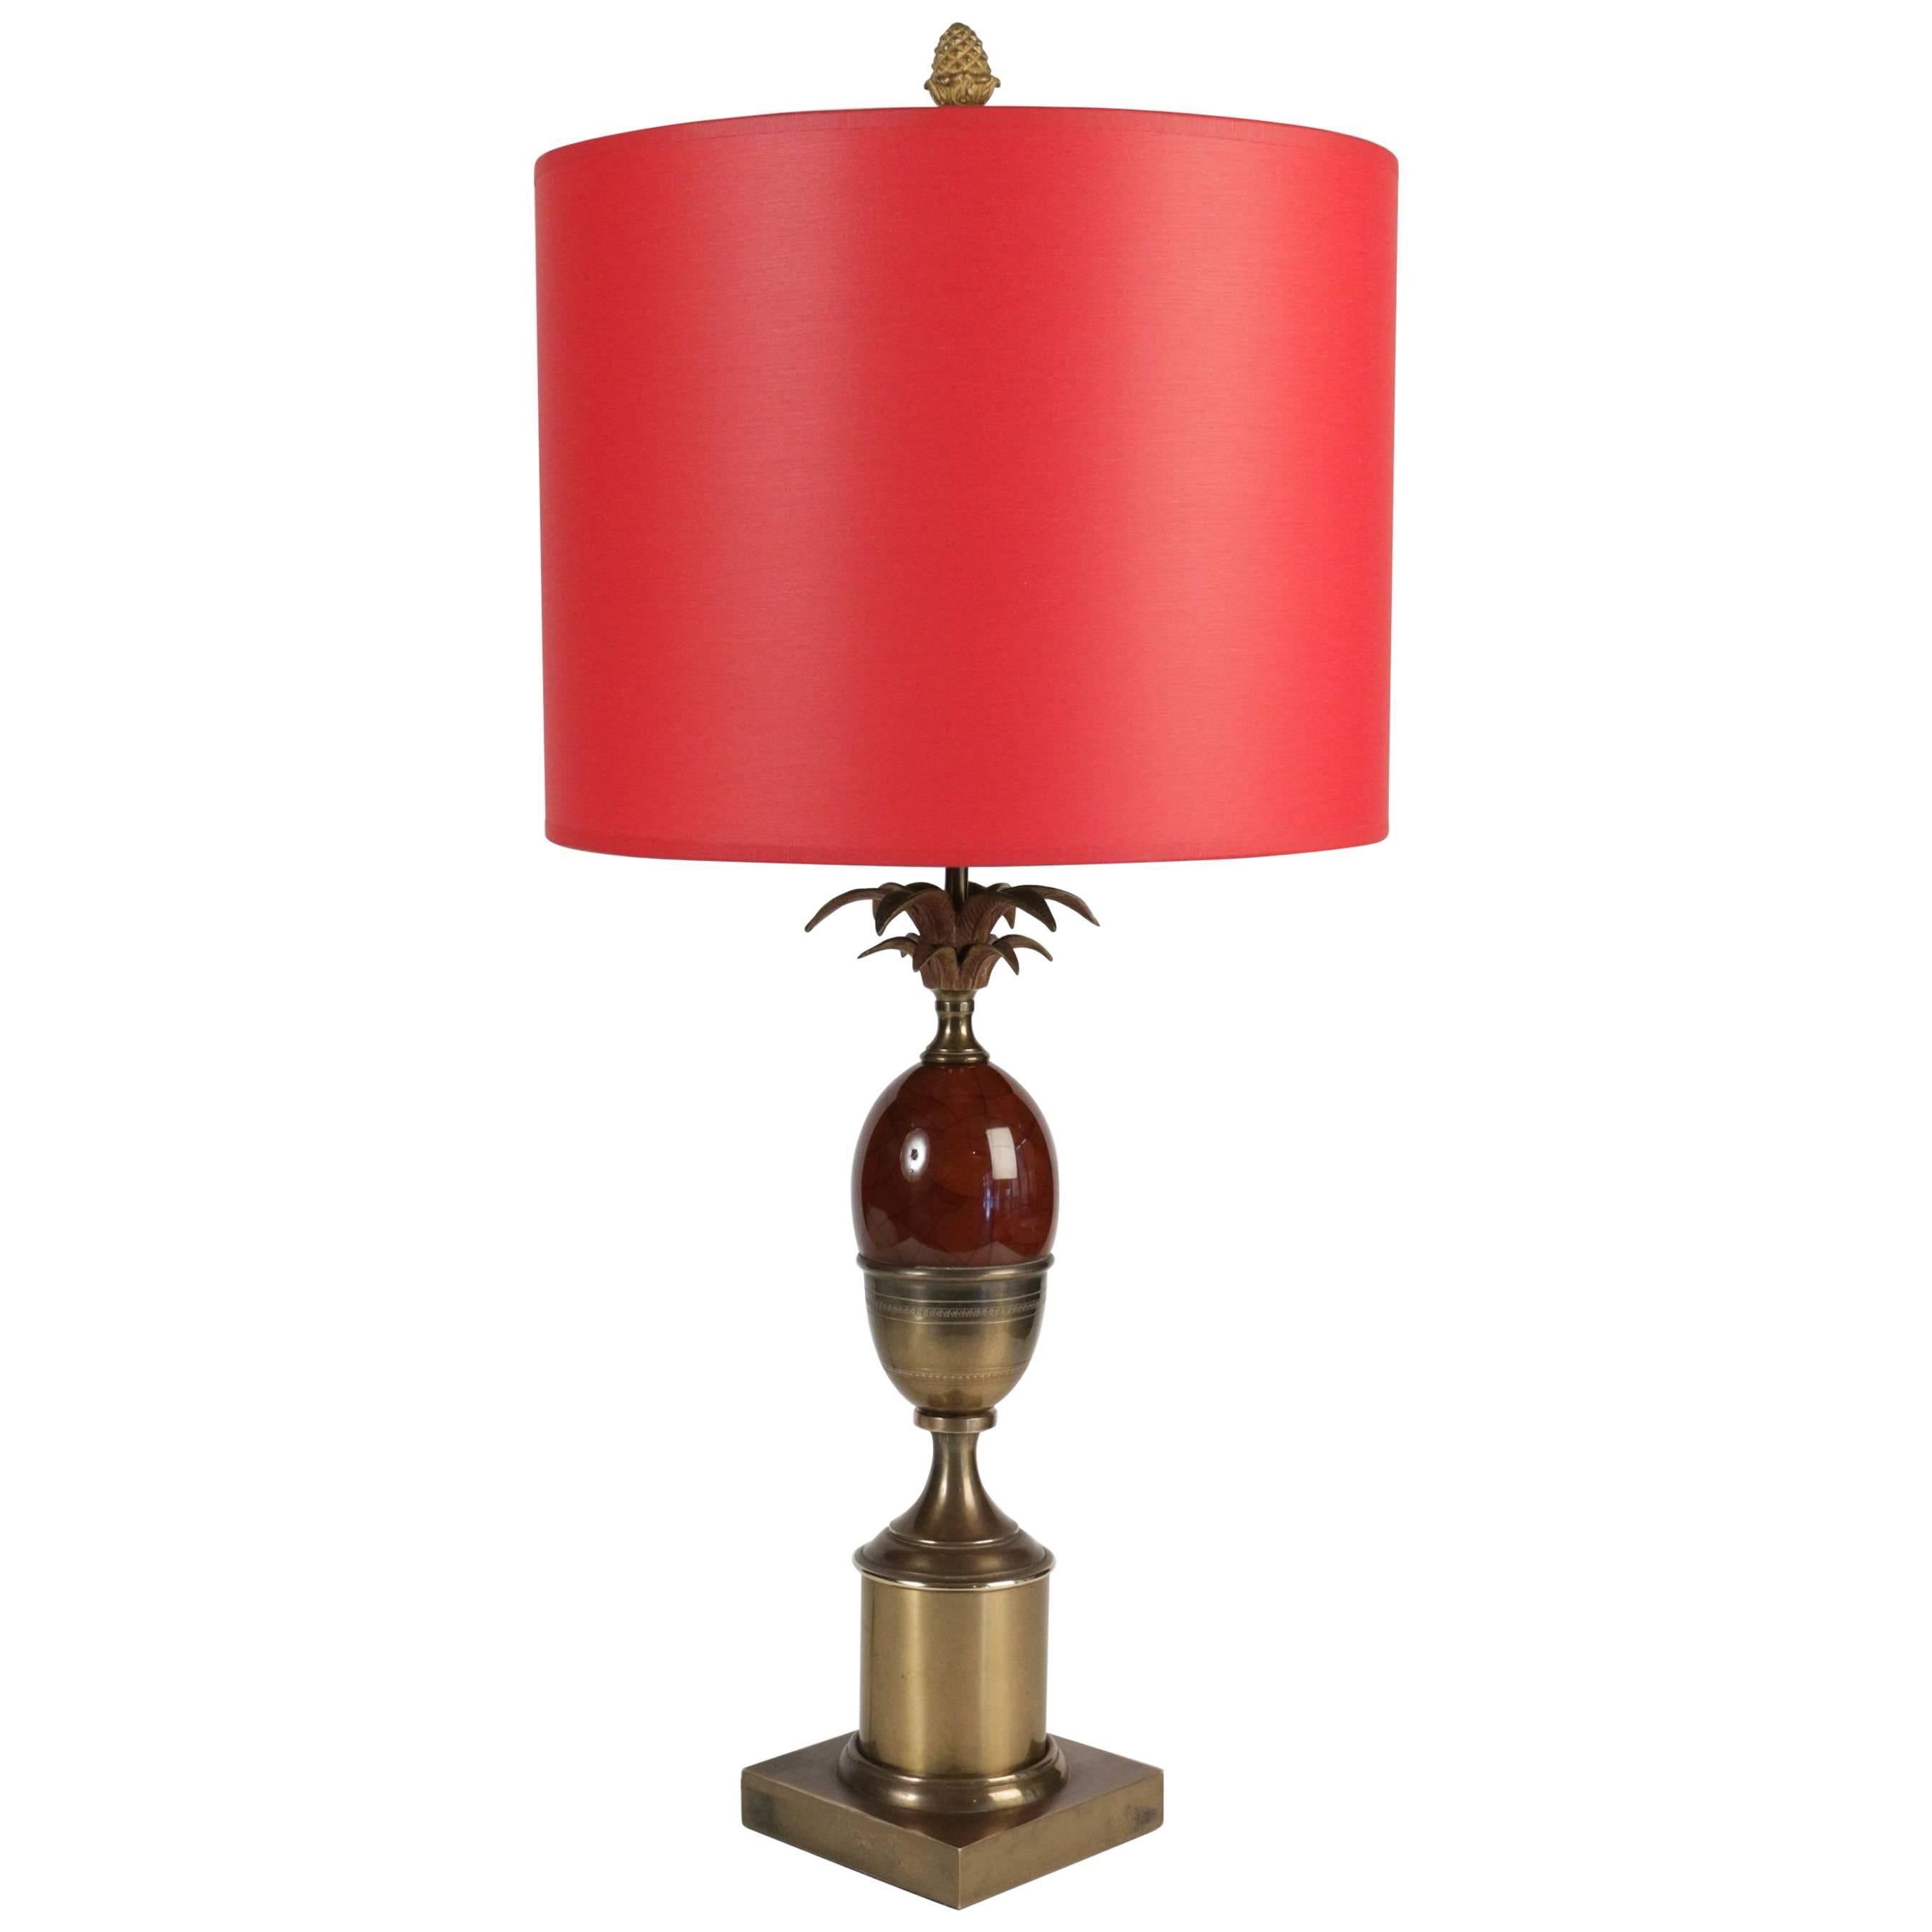 The Modernity Moderns 1960s Red Lamp in Brass and Resin (lampe rouge en laiton et résine)